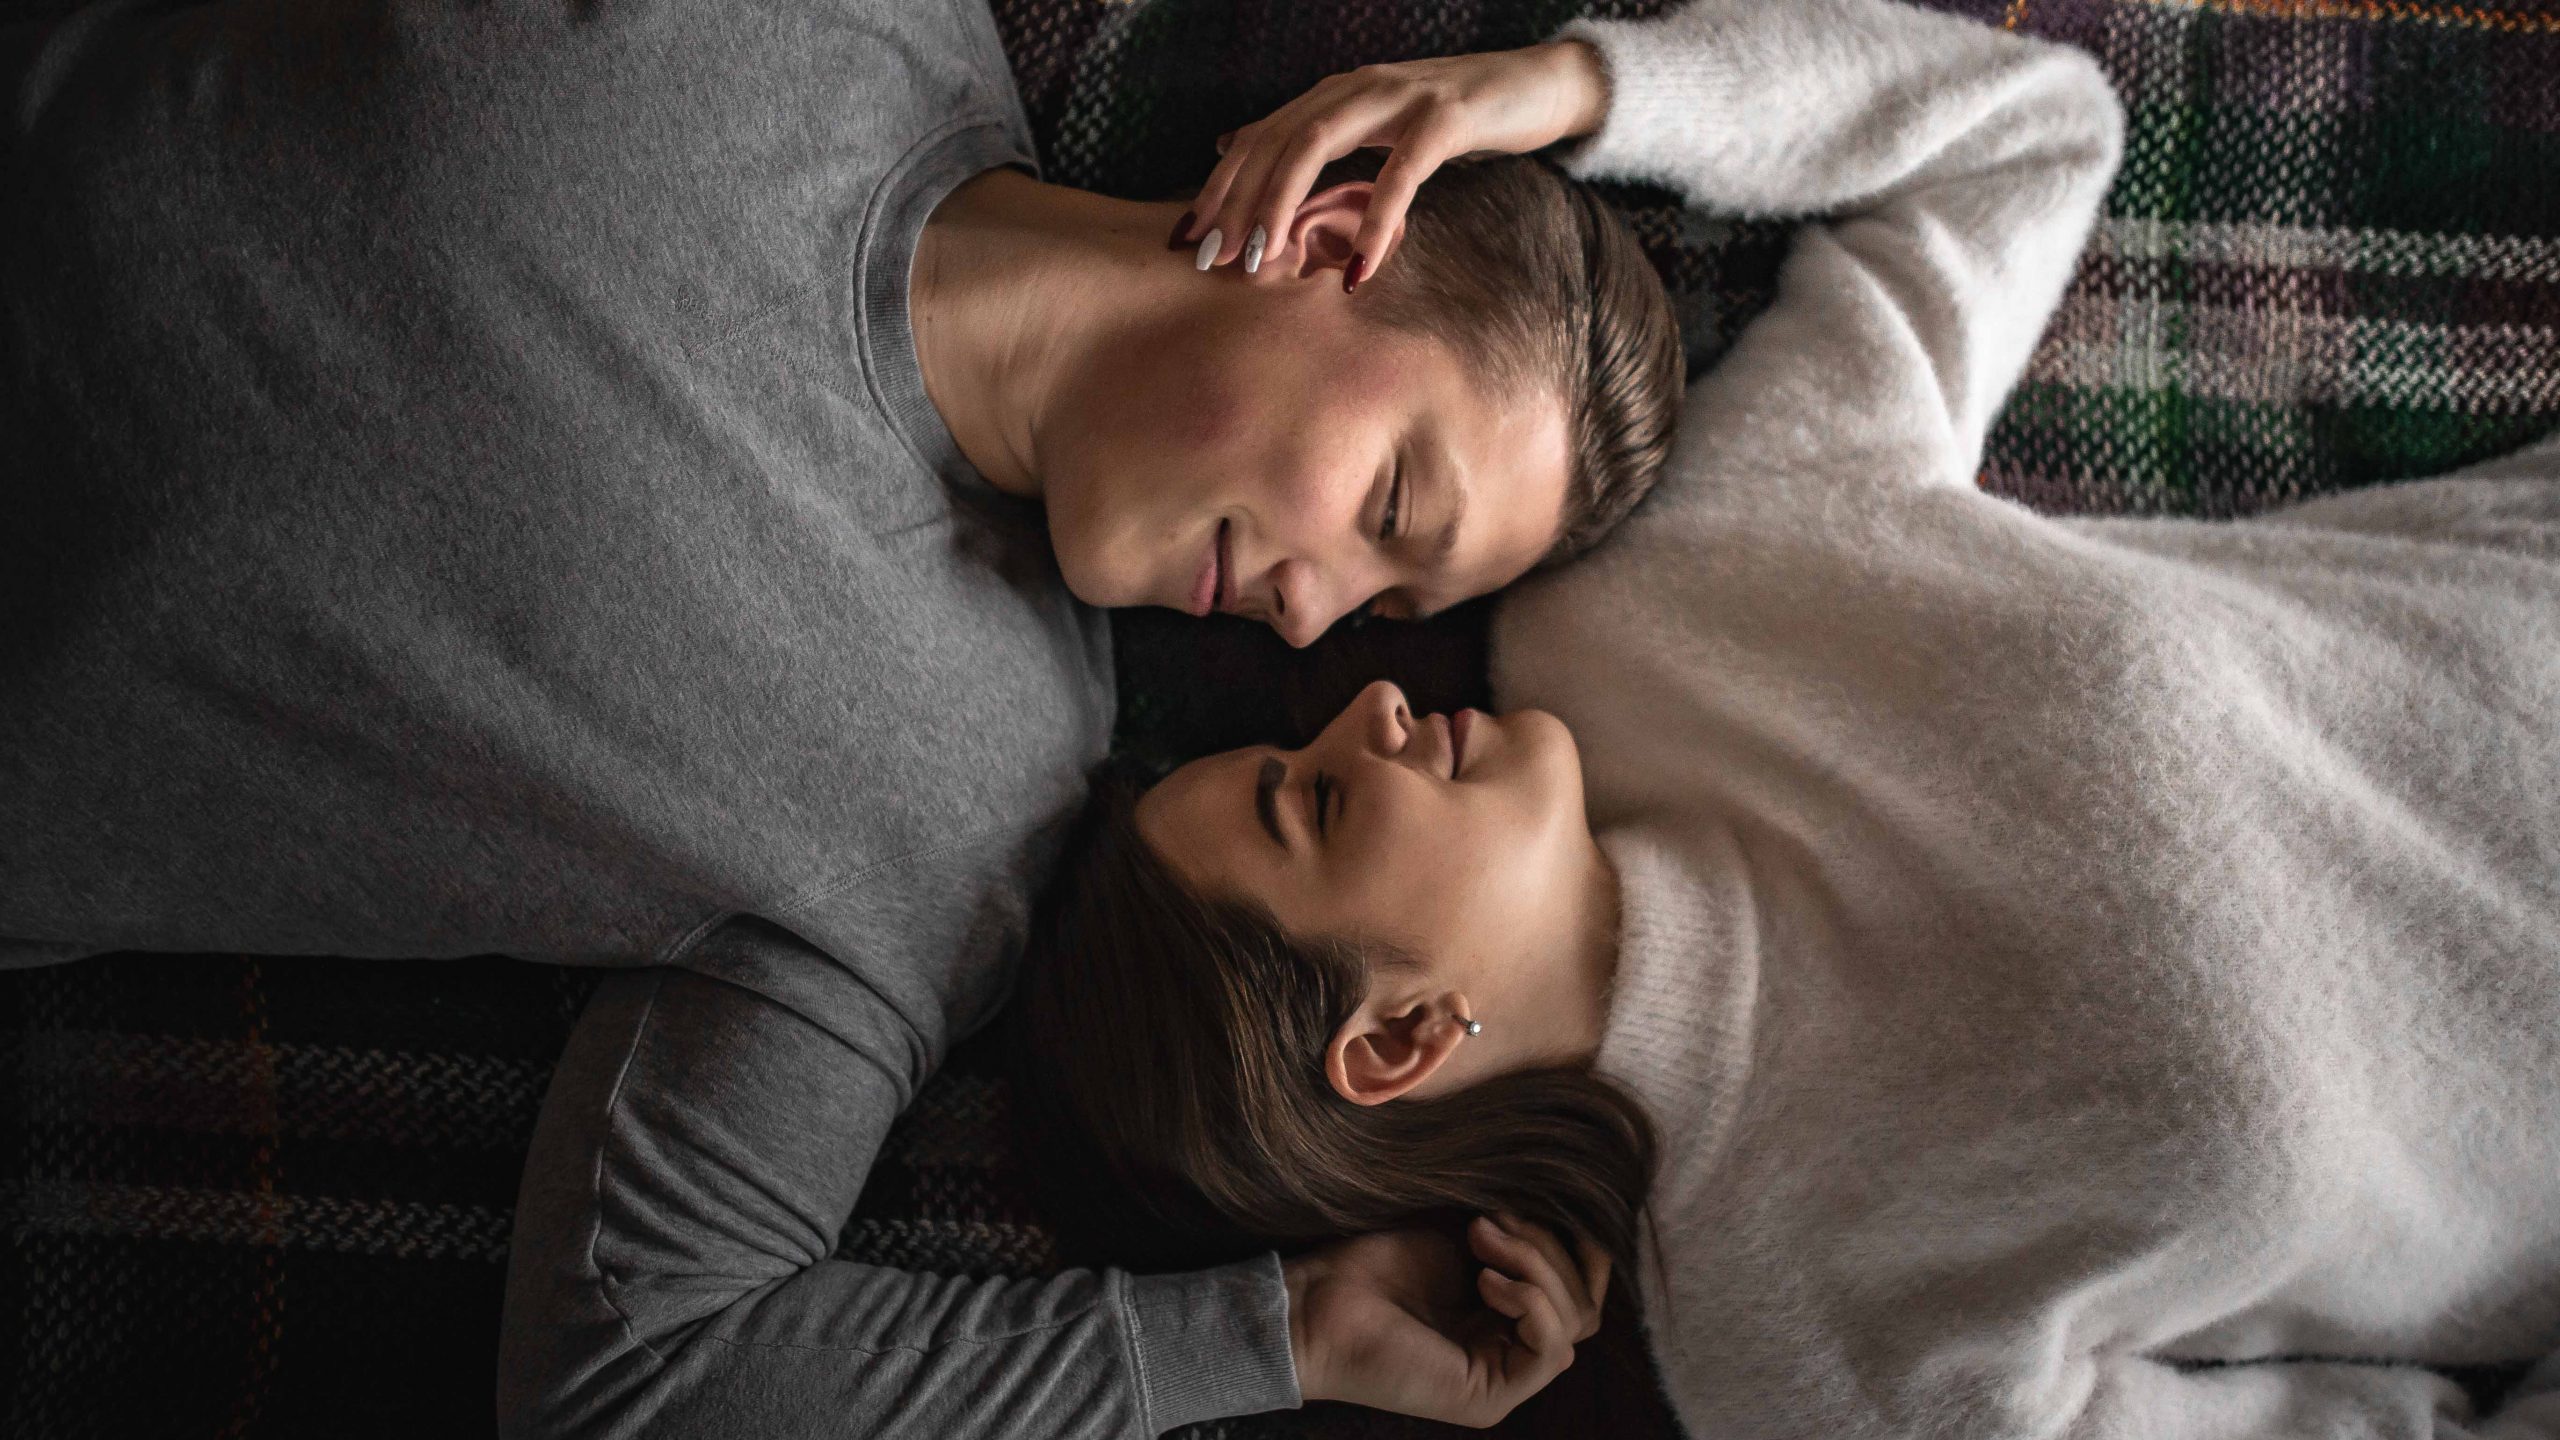 Should couples sleep together before marriage?